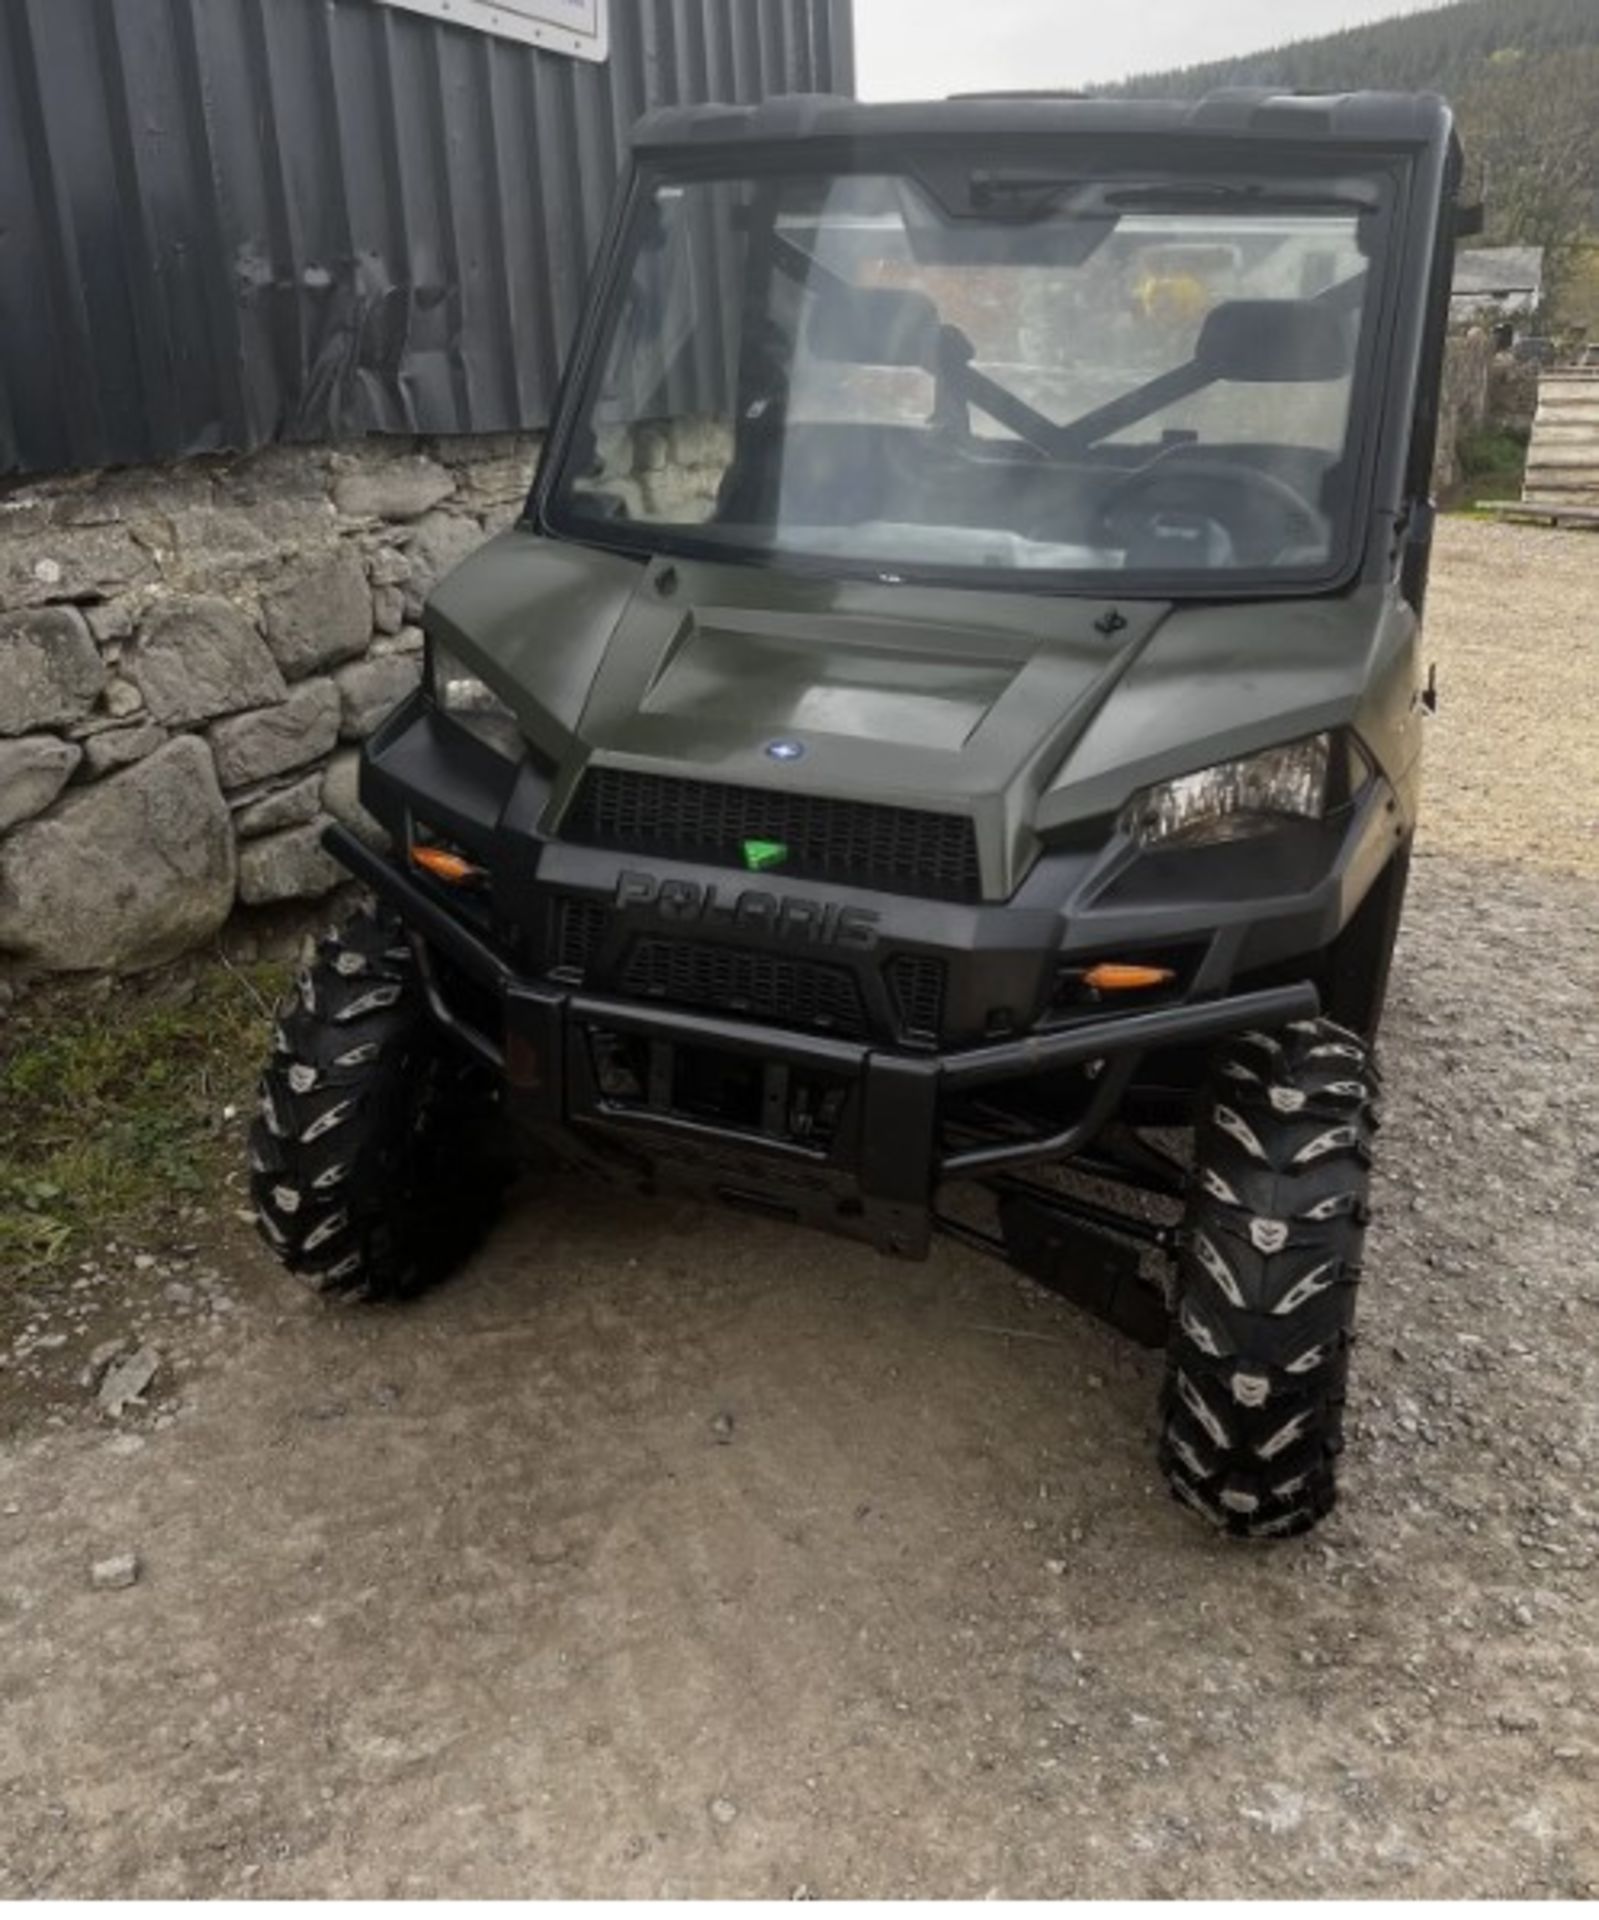 2019 POLARIS RANGER 1000D - YOUR ULTIMATE WORKHORSE FOR AGRICULTURAL TASKS - Image 3 of 11